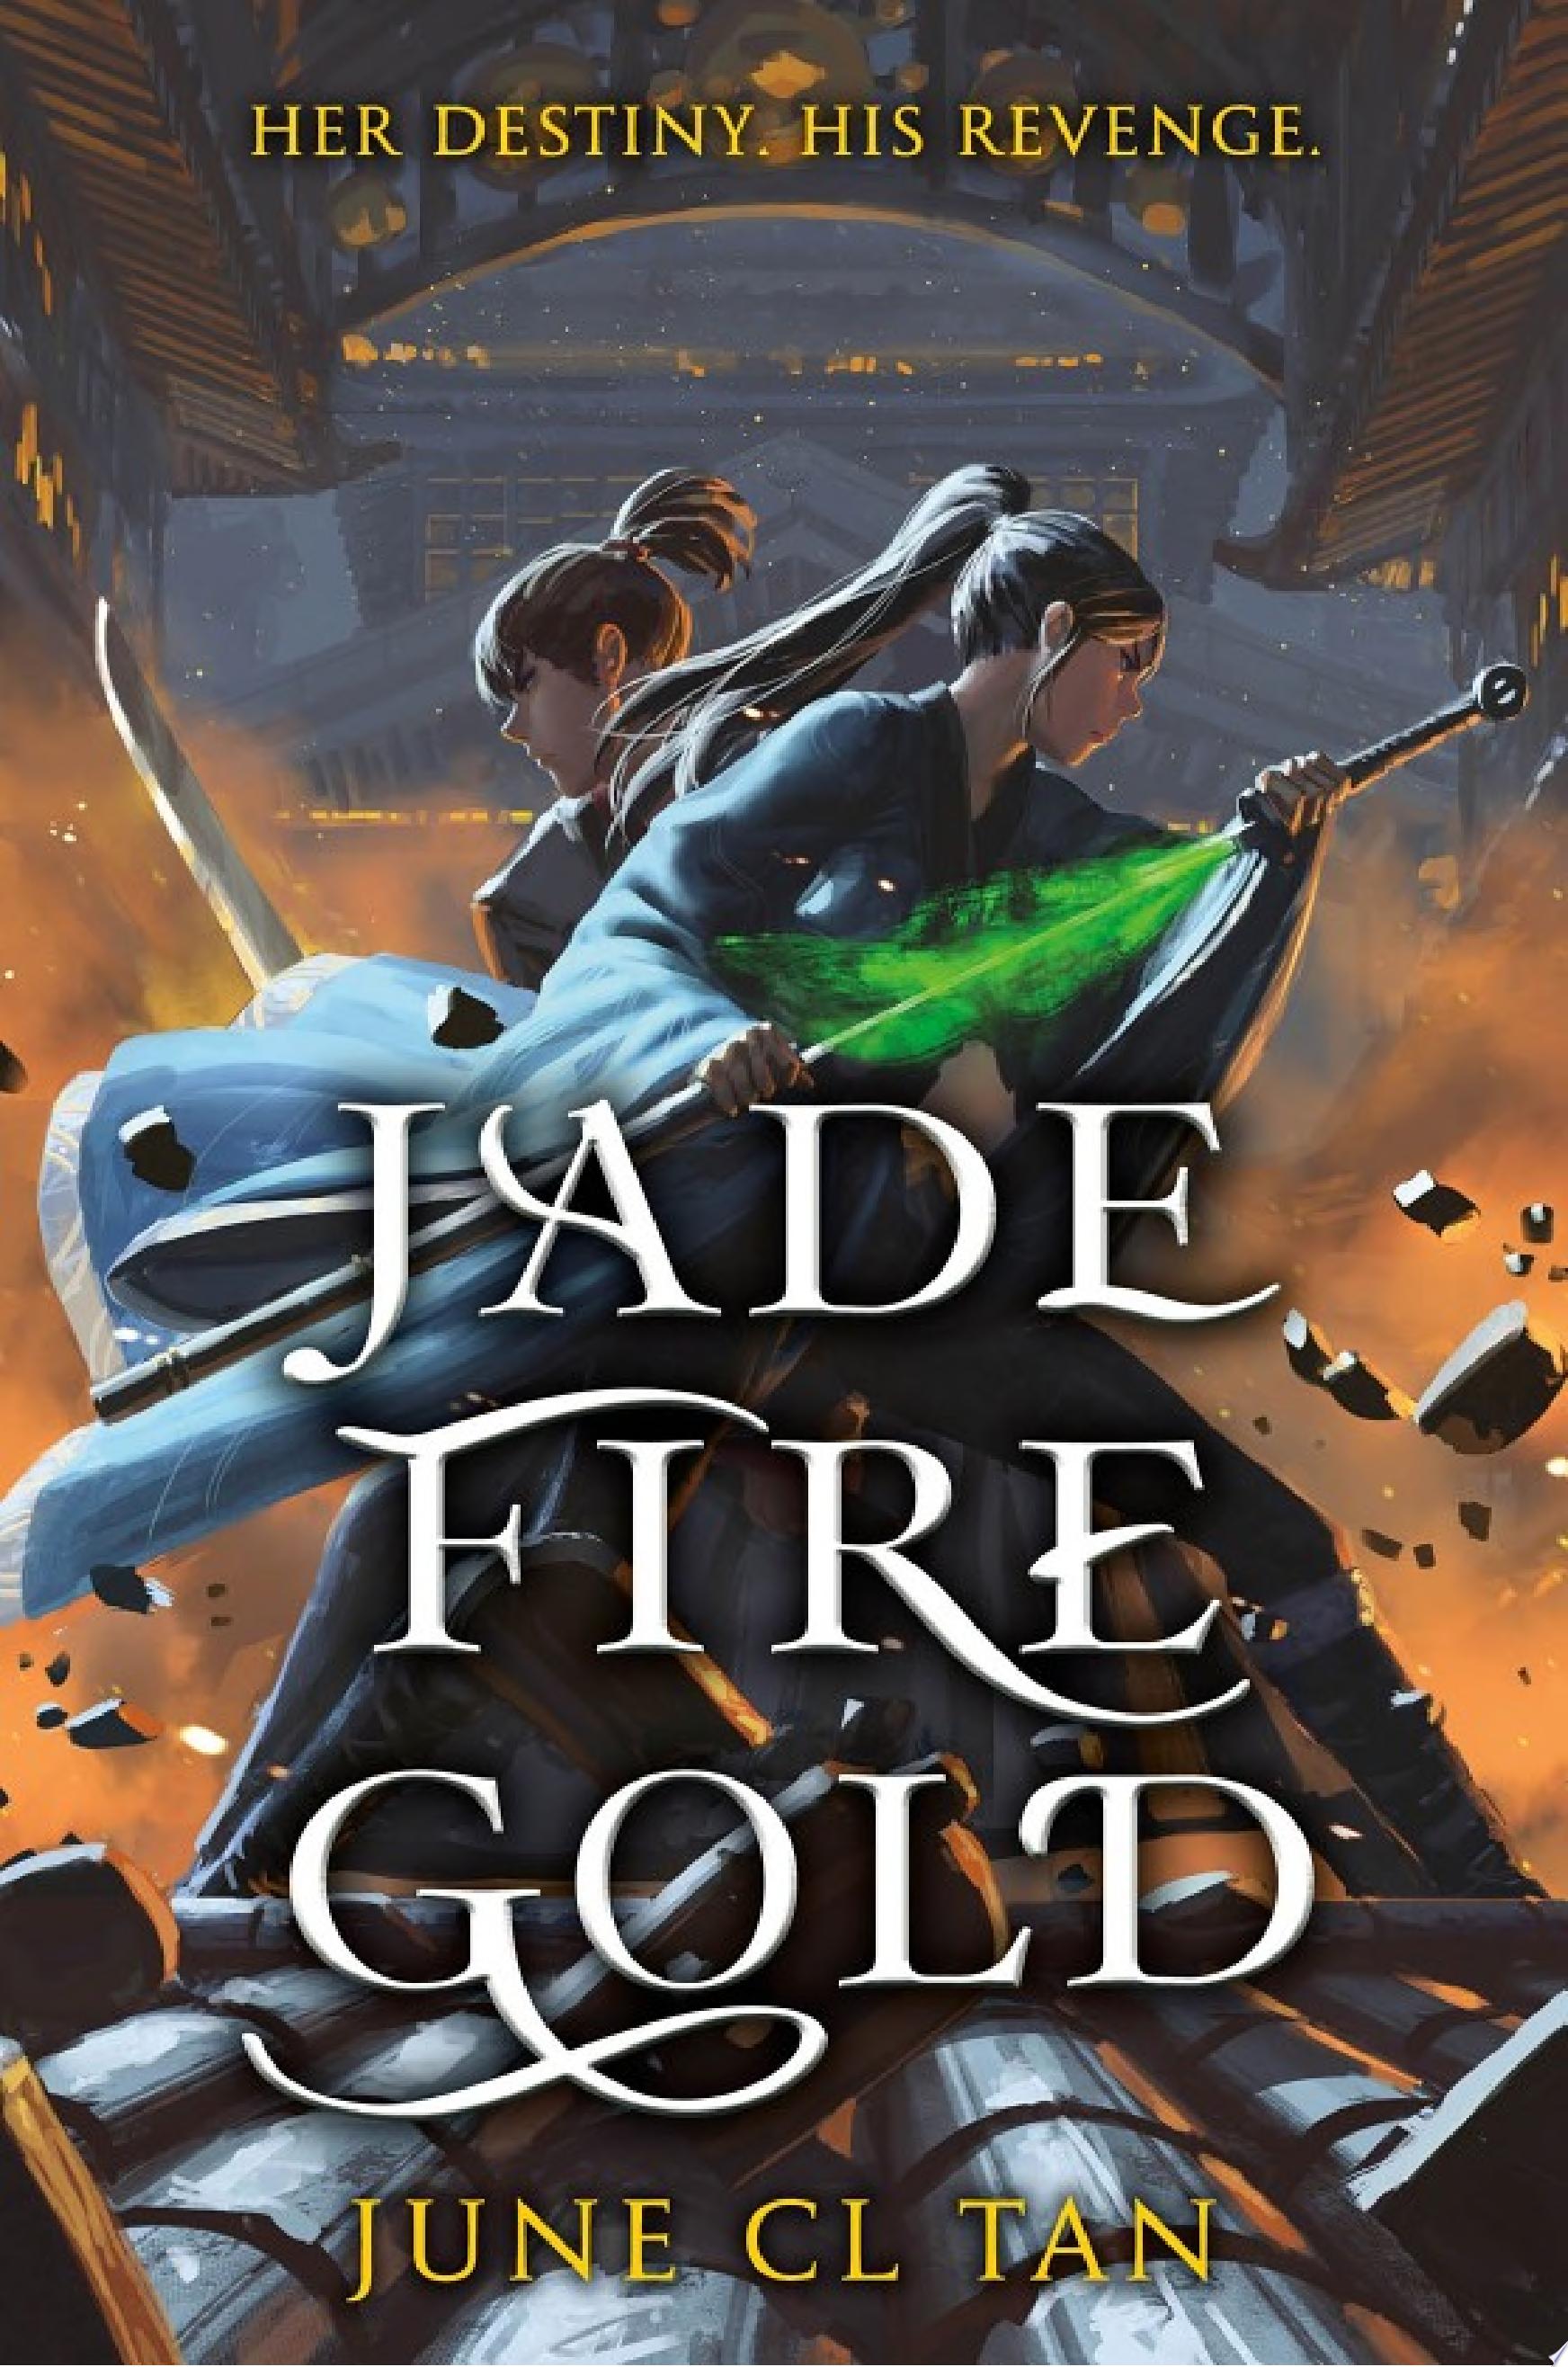 Image for "Jade Fire Gold"